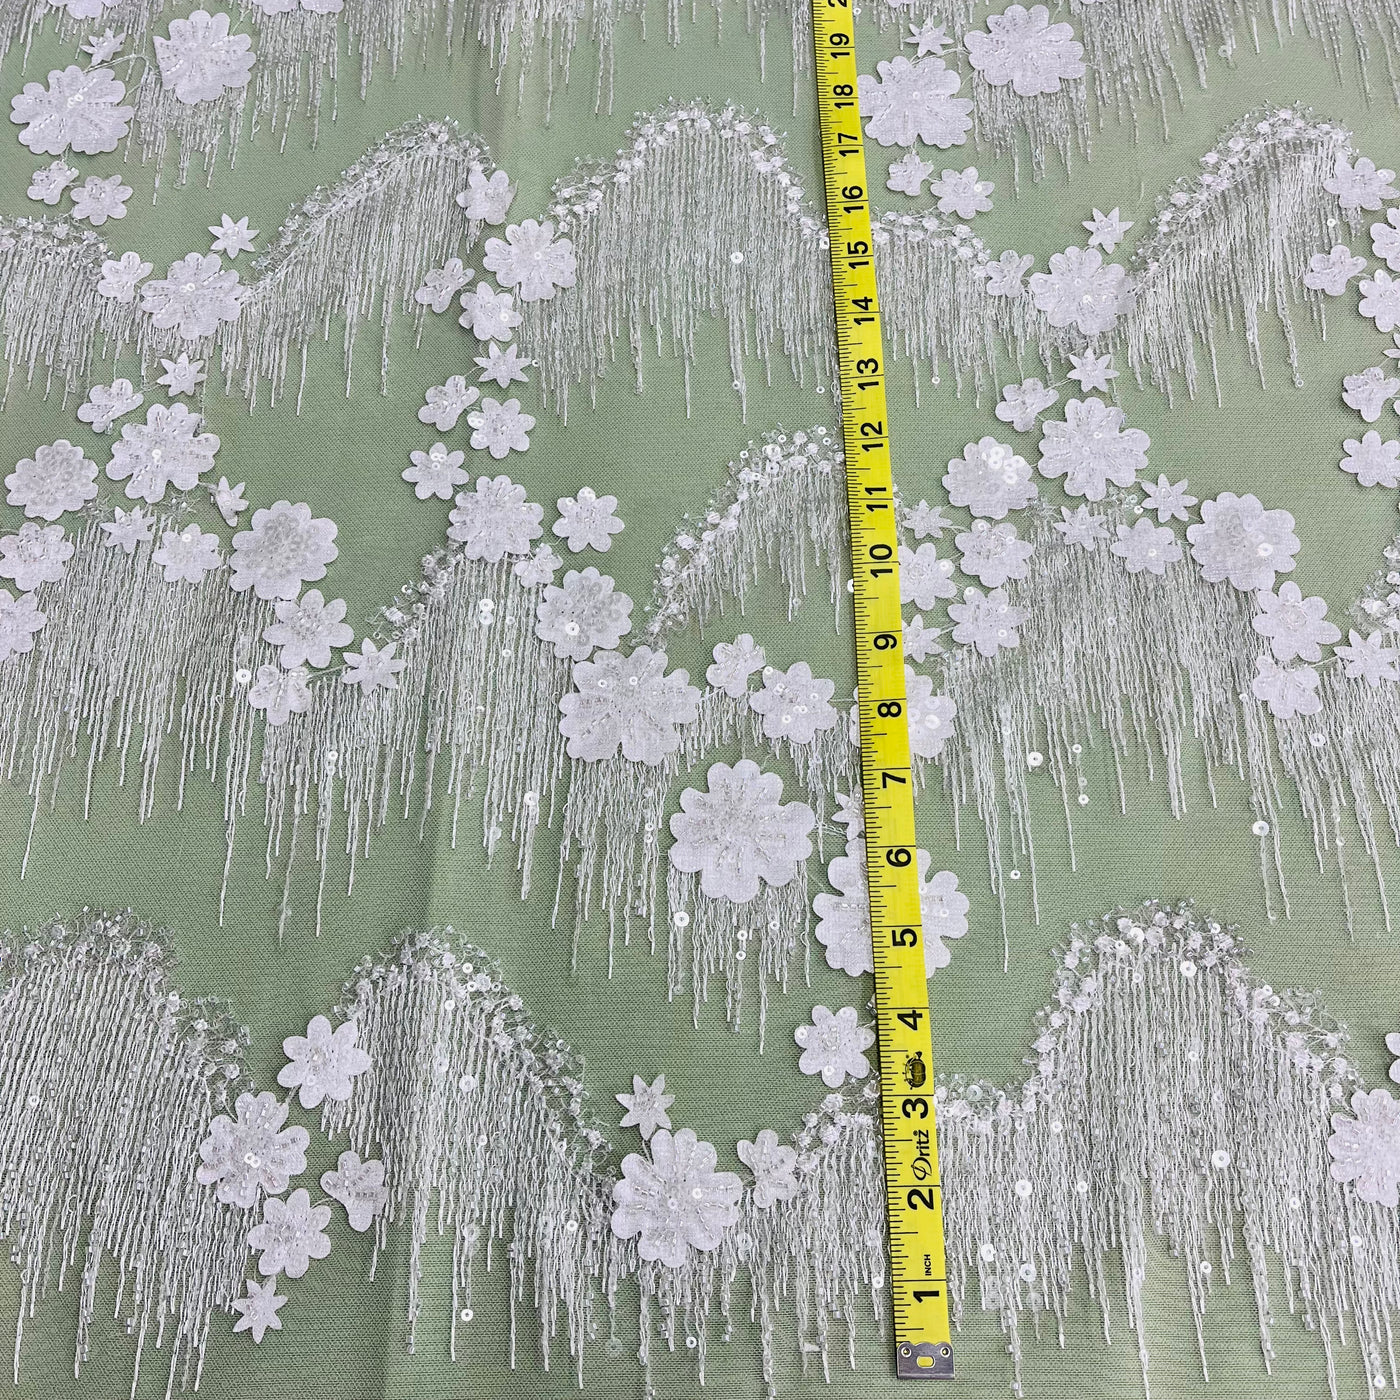 Beaded 3D Floral Lace Fabric Embroidered on 100% Polyester Net Mesh | Lace USA